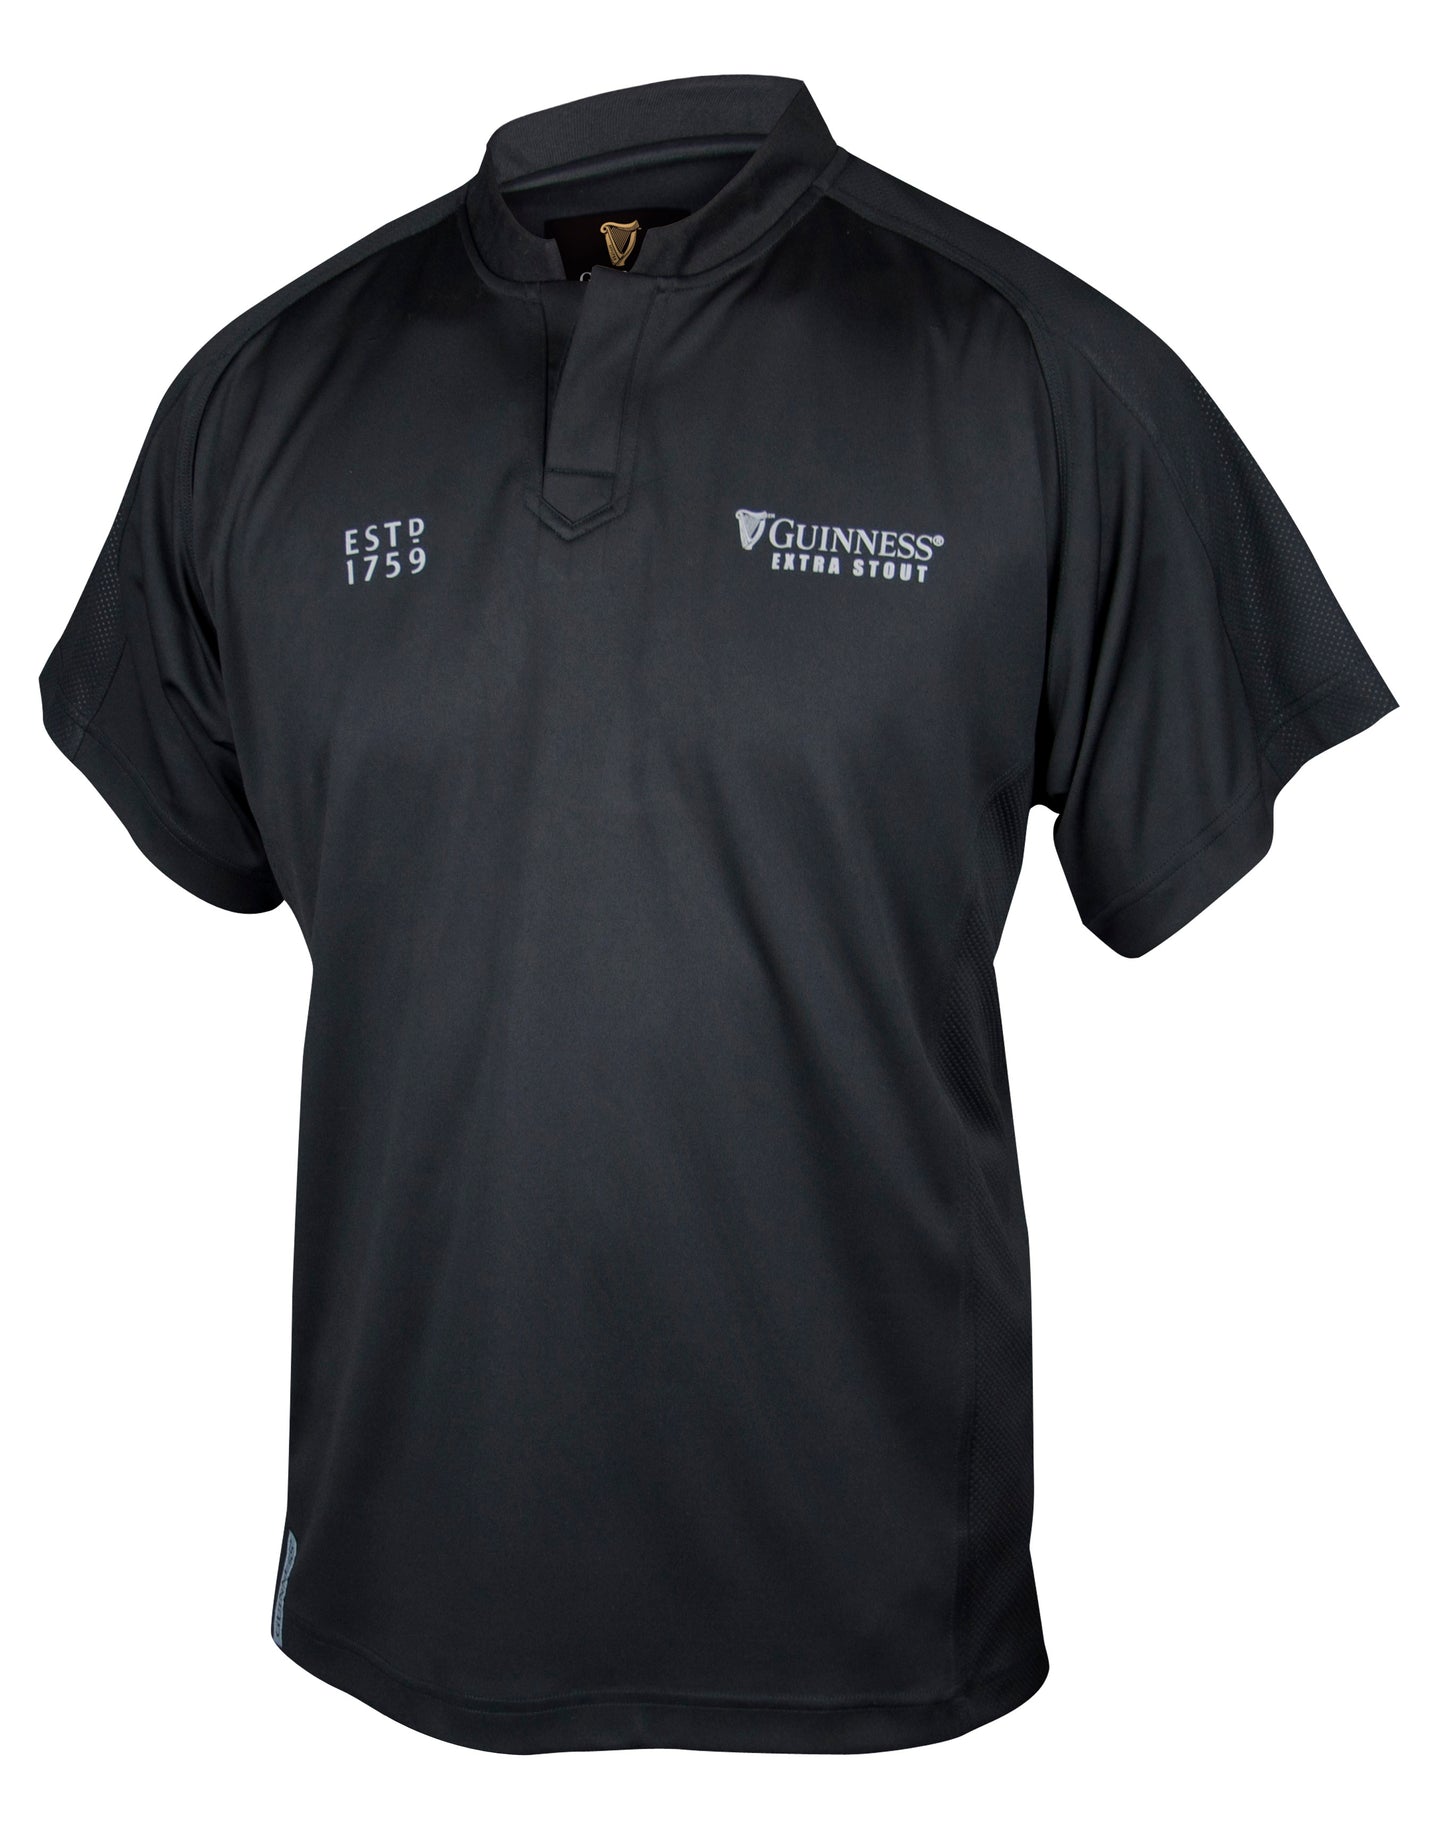 An All Black Rugby Jersey with a white logo of Guinness branding on it.